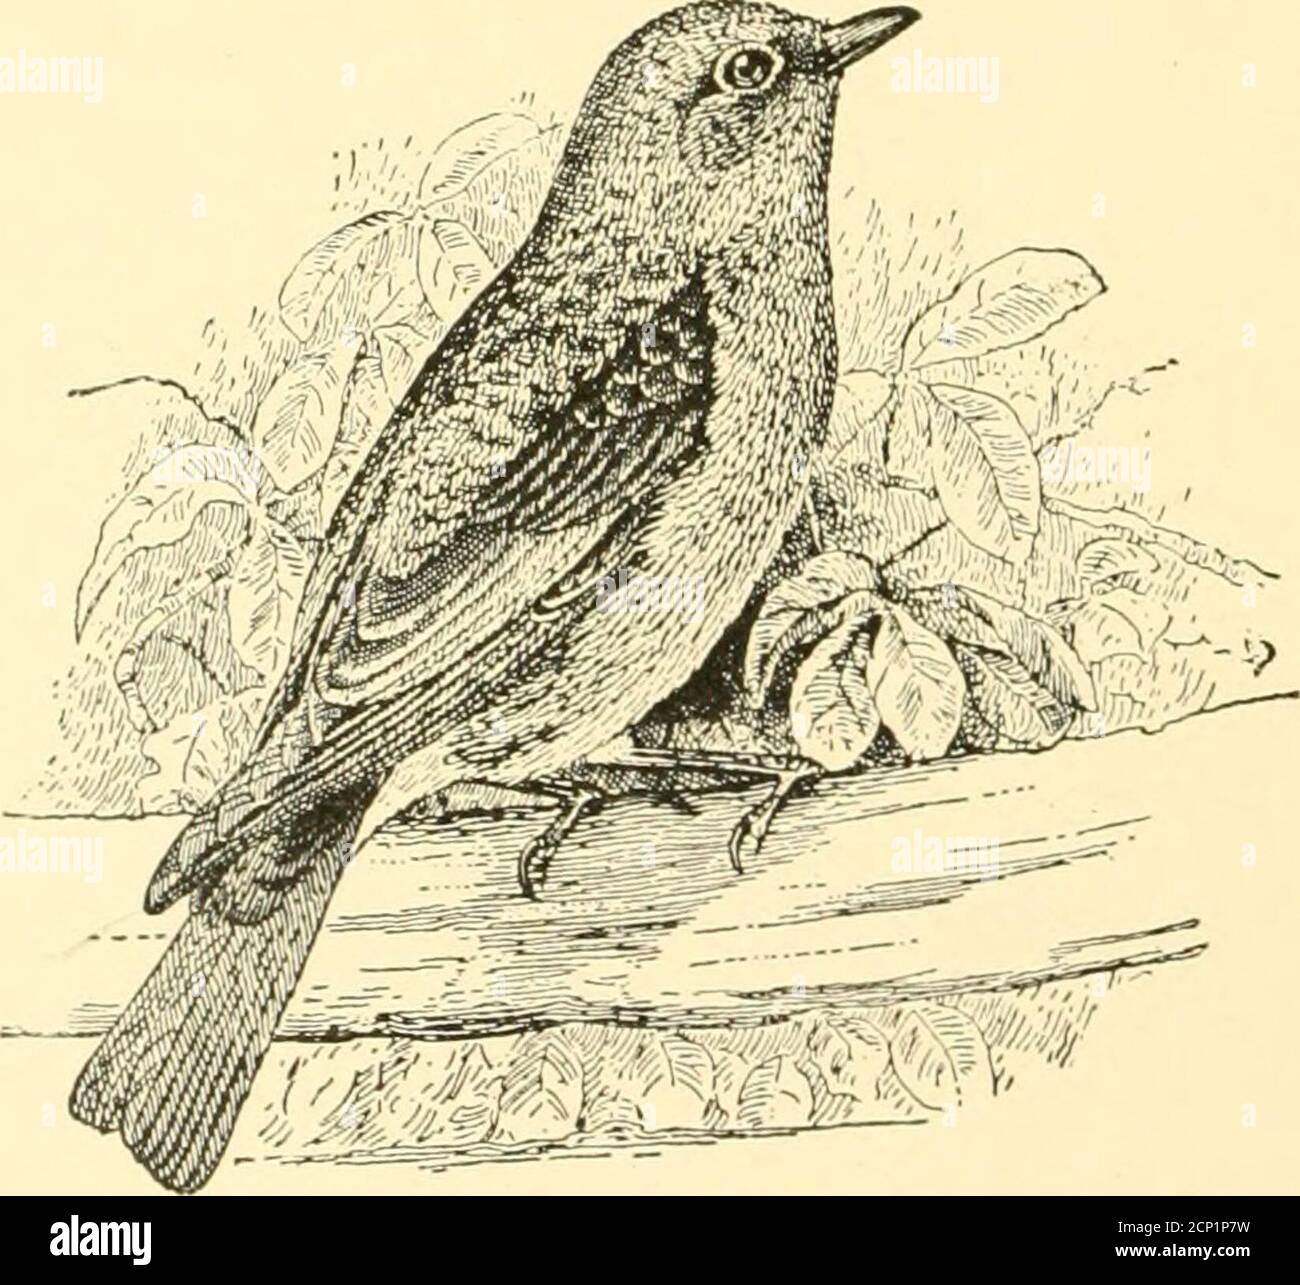 . Birds in their relations to man; a manual of economic ornithology for the United States and Canada . rd usually does harmrather than good in eating a parasite of an injurious phy-tophagous insect. Nothing has been said in regard to those parasites uponparasites which are called the secondary or hyper-parasitesof noxious insects. Our knowledge of the precise biologicalrelations of these is limited. On general principles it is prob-able that when a bird eats one of these it is at least as likelyto be doing man a benefit as an injury.1 1 For an account of the relations between hymenopterous par Stock Photo